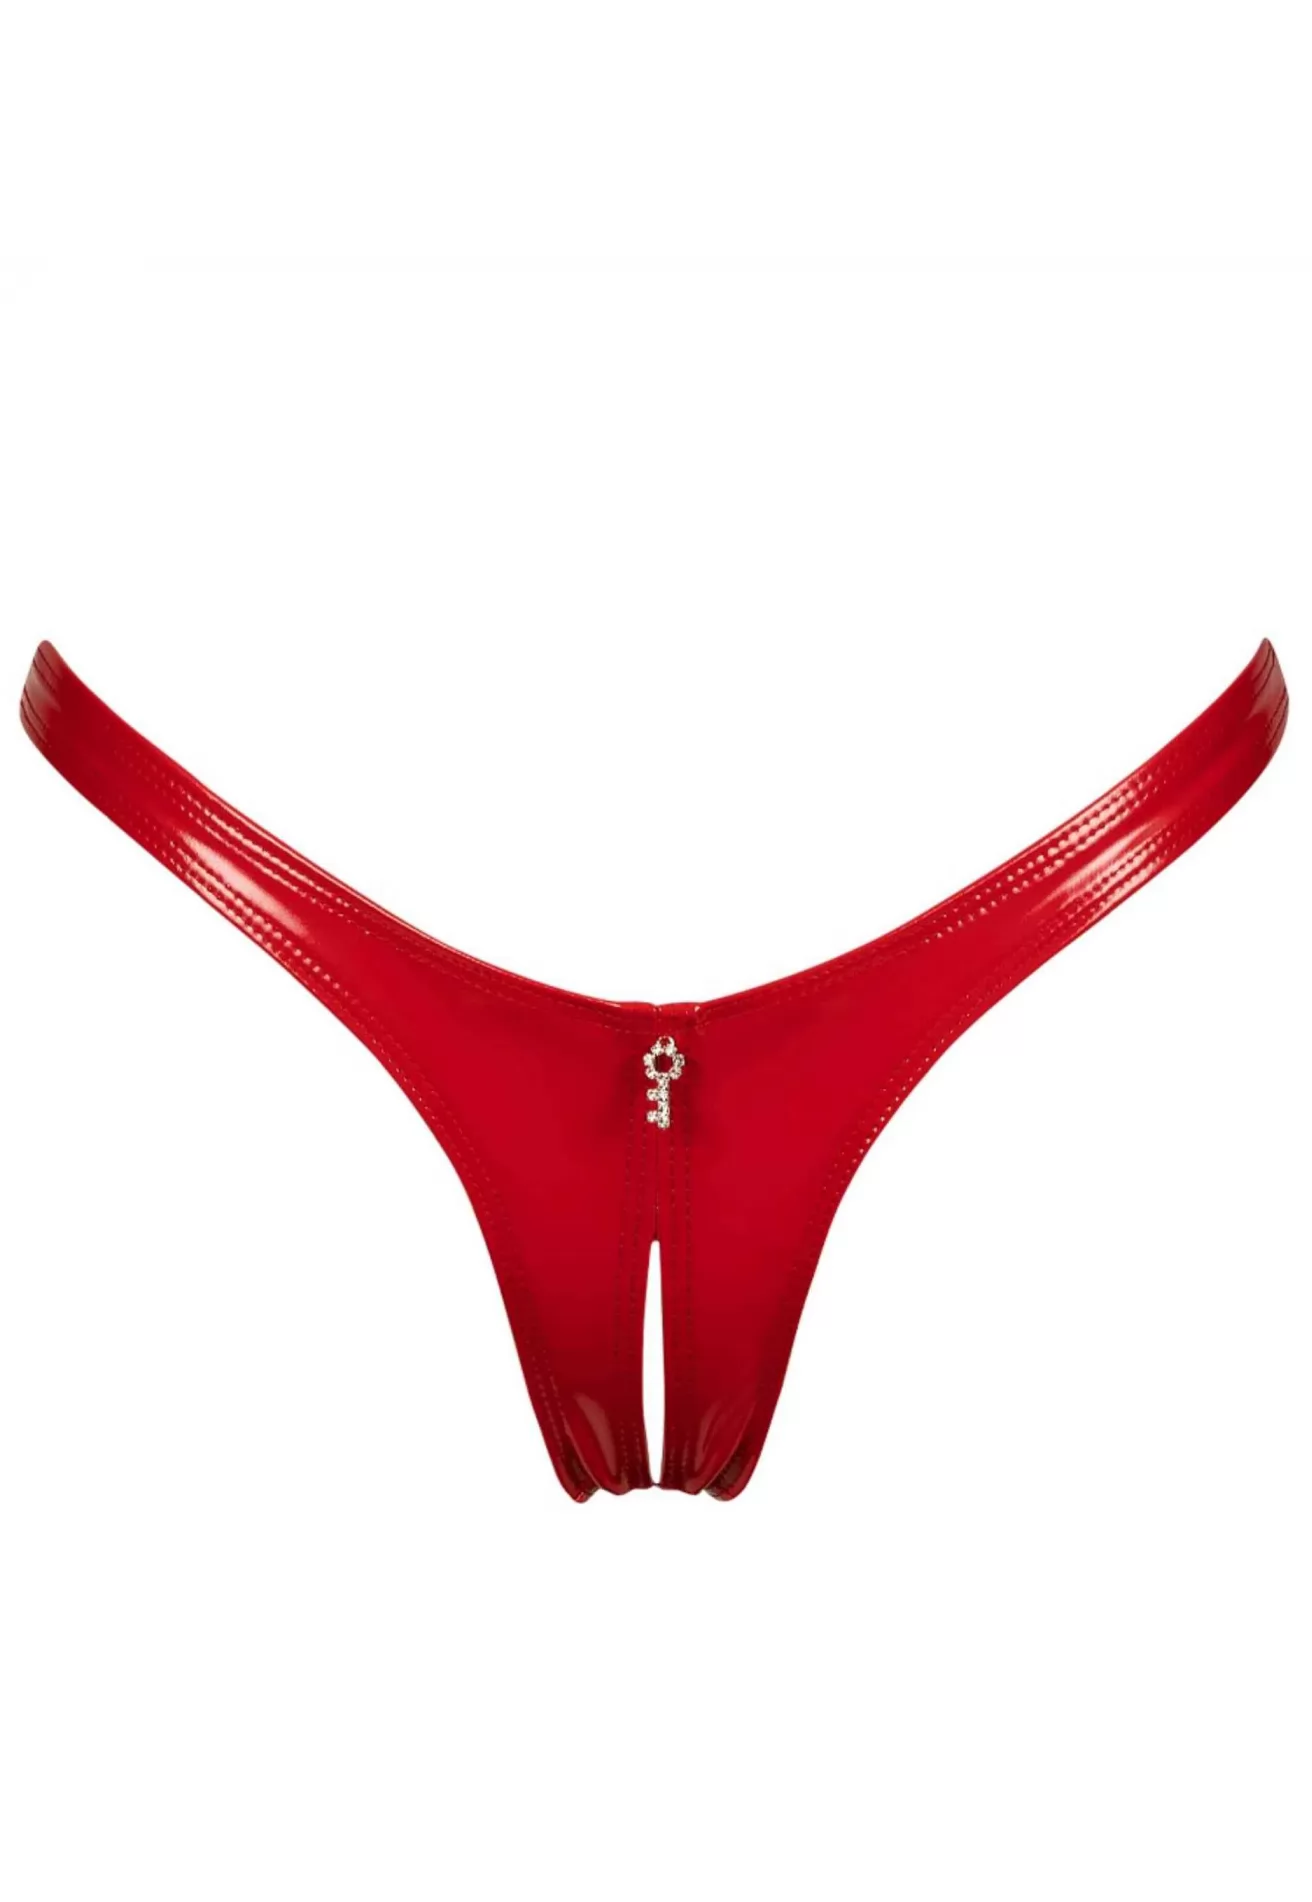 Red vinyl Crotchless thong Annabelle